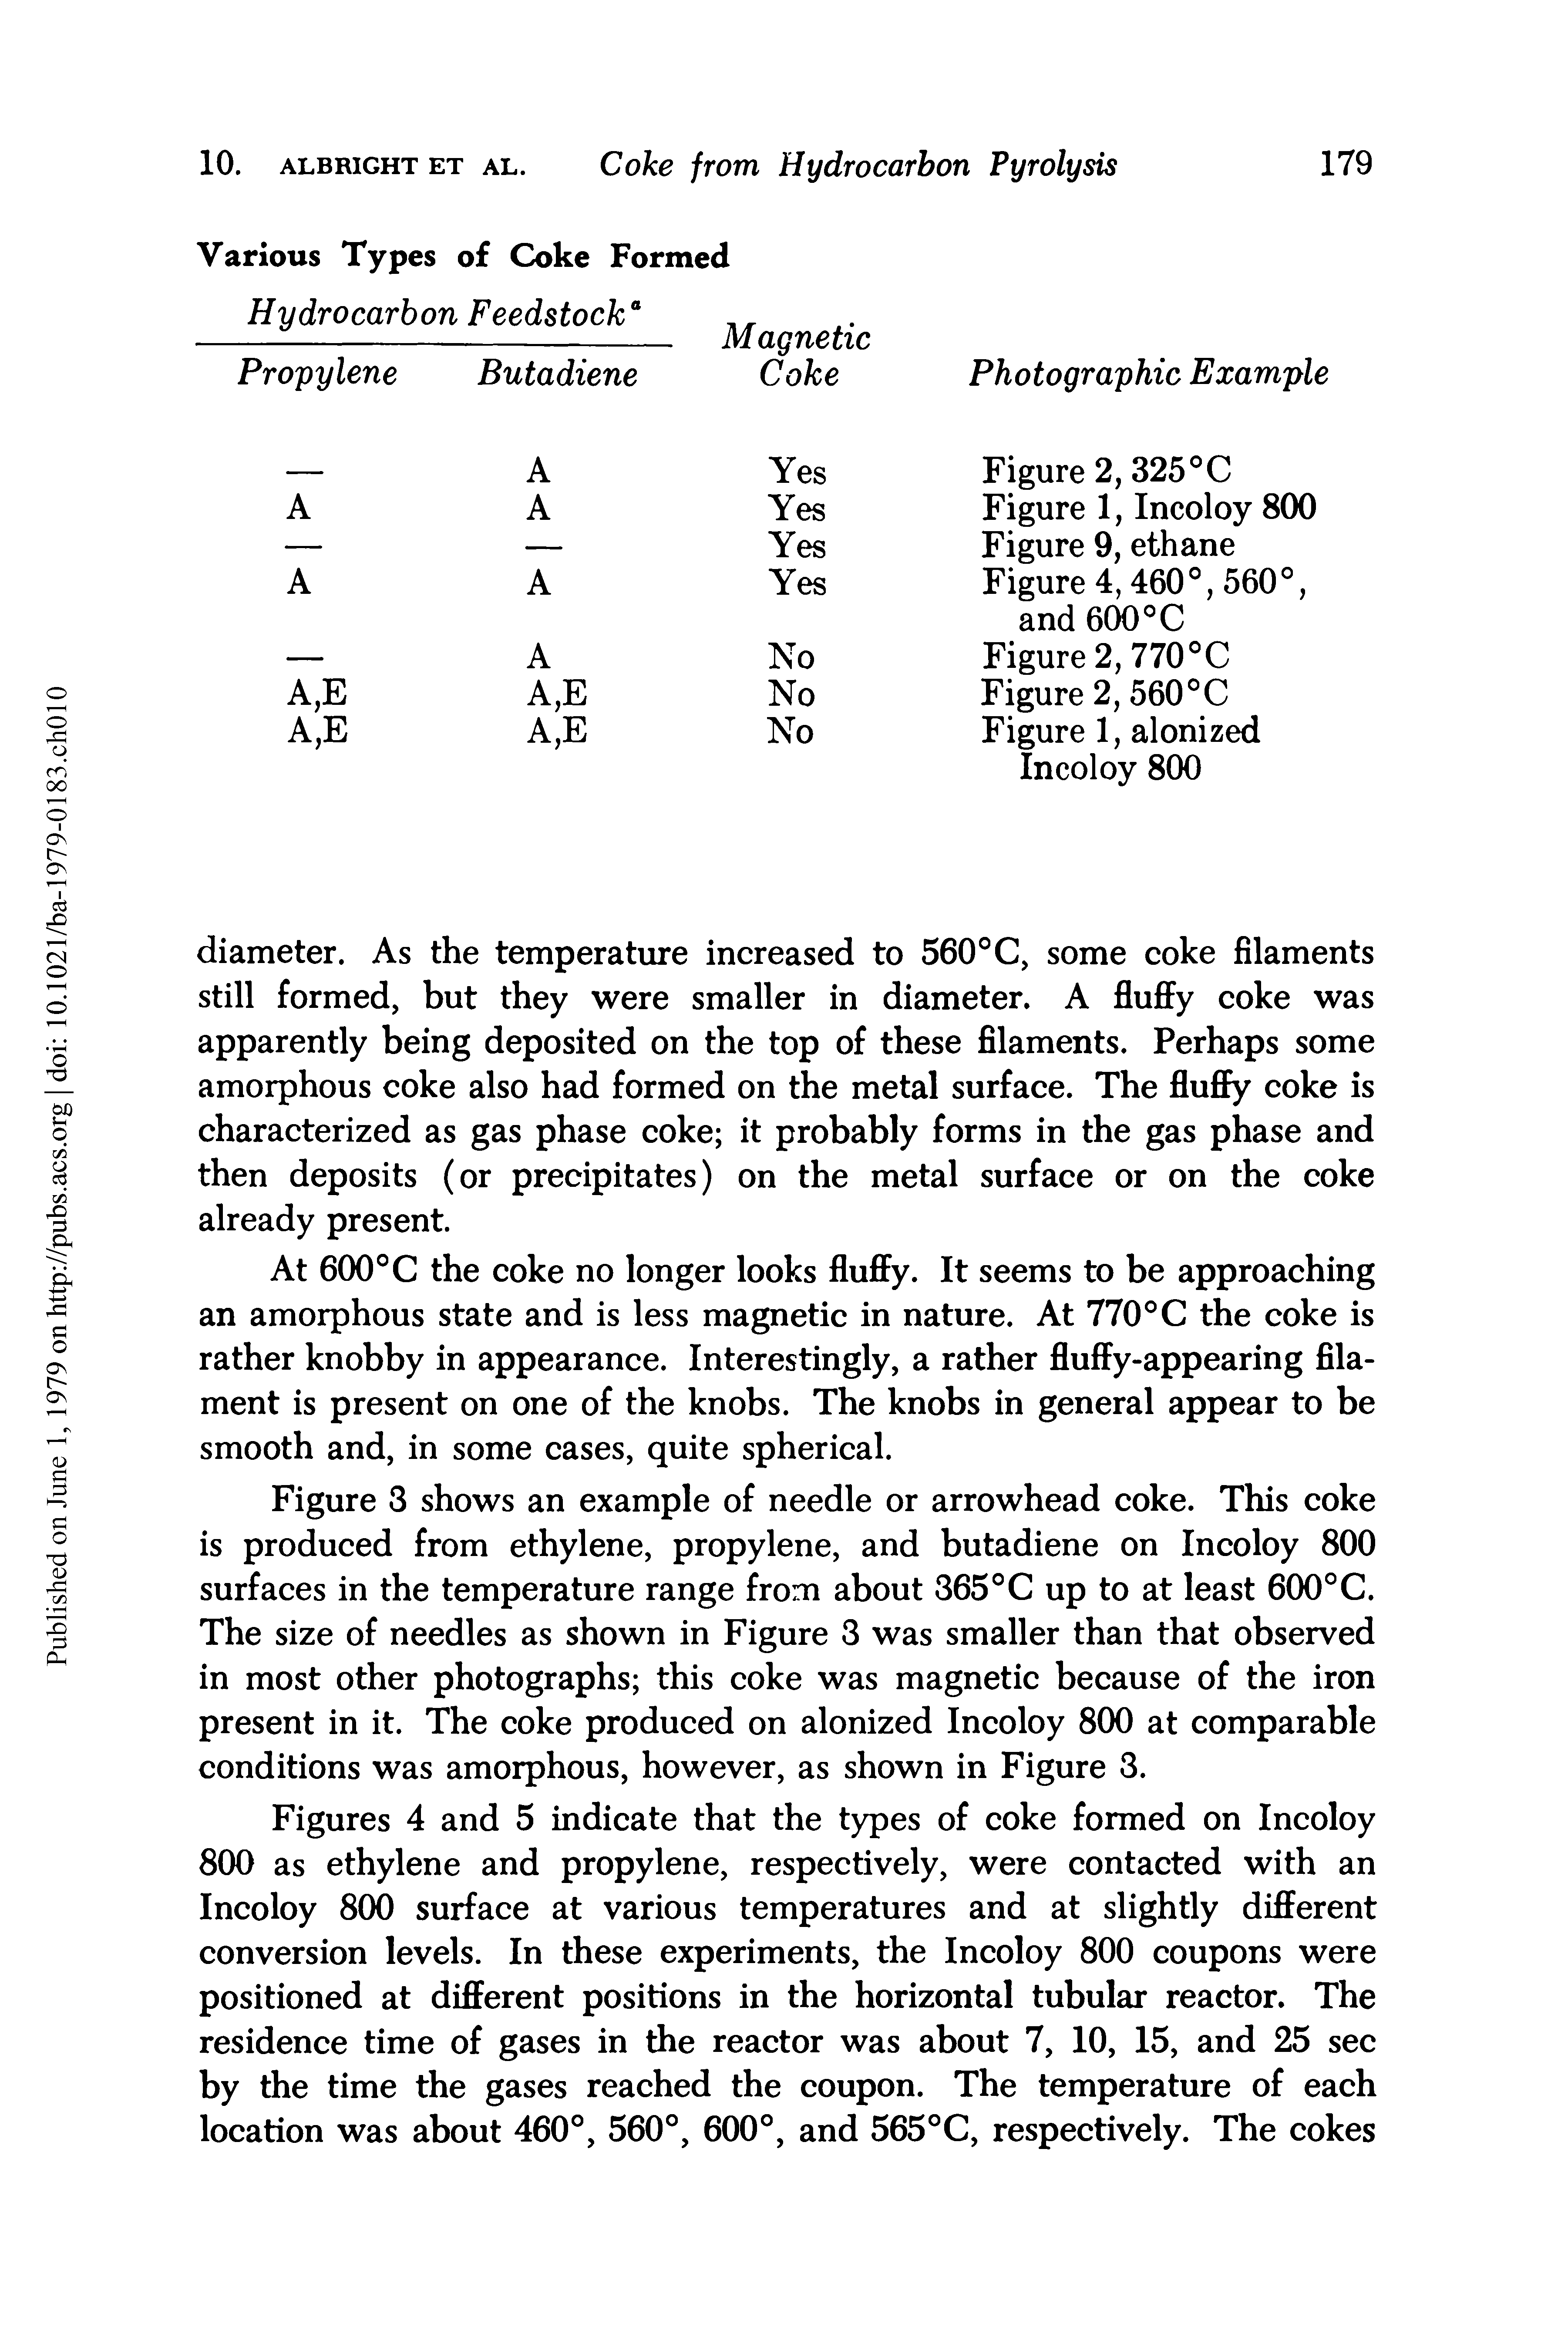 Figures 4 and 5 indicate that the types of coke formed on Incoloy 800 as ethylene and propylene, respectively, were contacted with an Incoloy 800 surface at various temperatures and at slightly different conversion levels. In these experiments, the Incoloy 800 coupons were positioned at different positions in the horizontal tubular reactor. The residence time of gases in the reactor was about 7, 10, 15, and 25 sec by the time the gases reached the coupon. The temperature of each location was about 460°, 560°, 600°, and 565°C, respectively. The cokes...